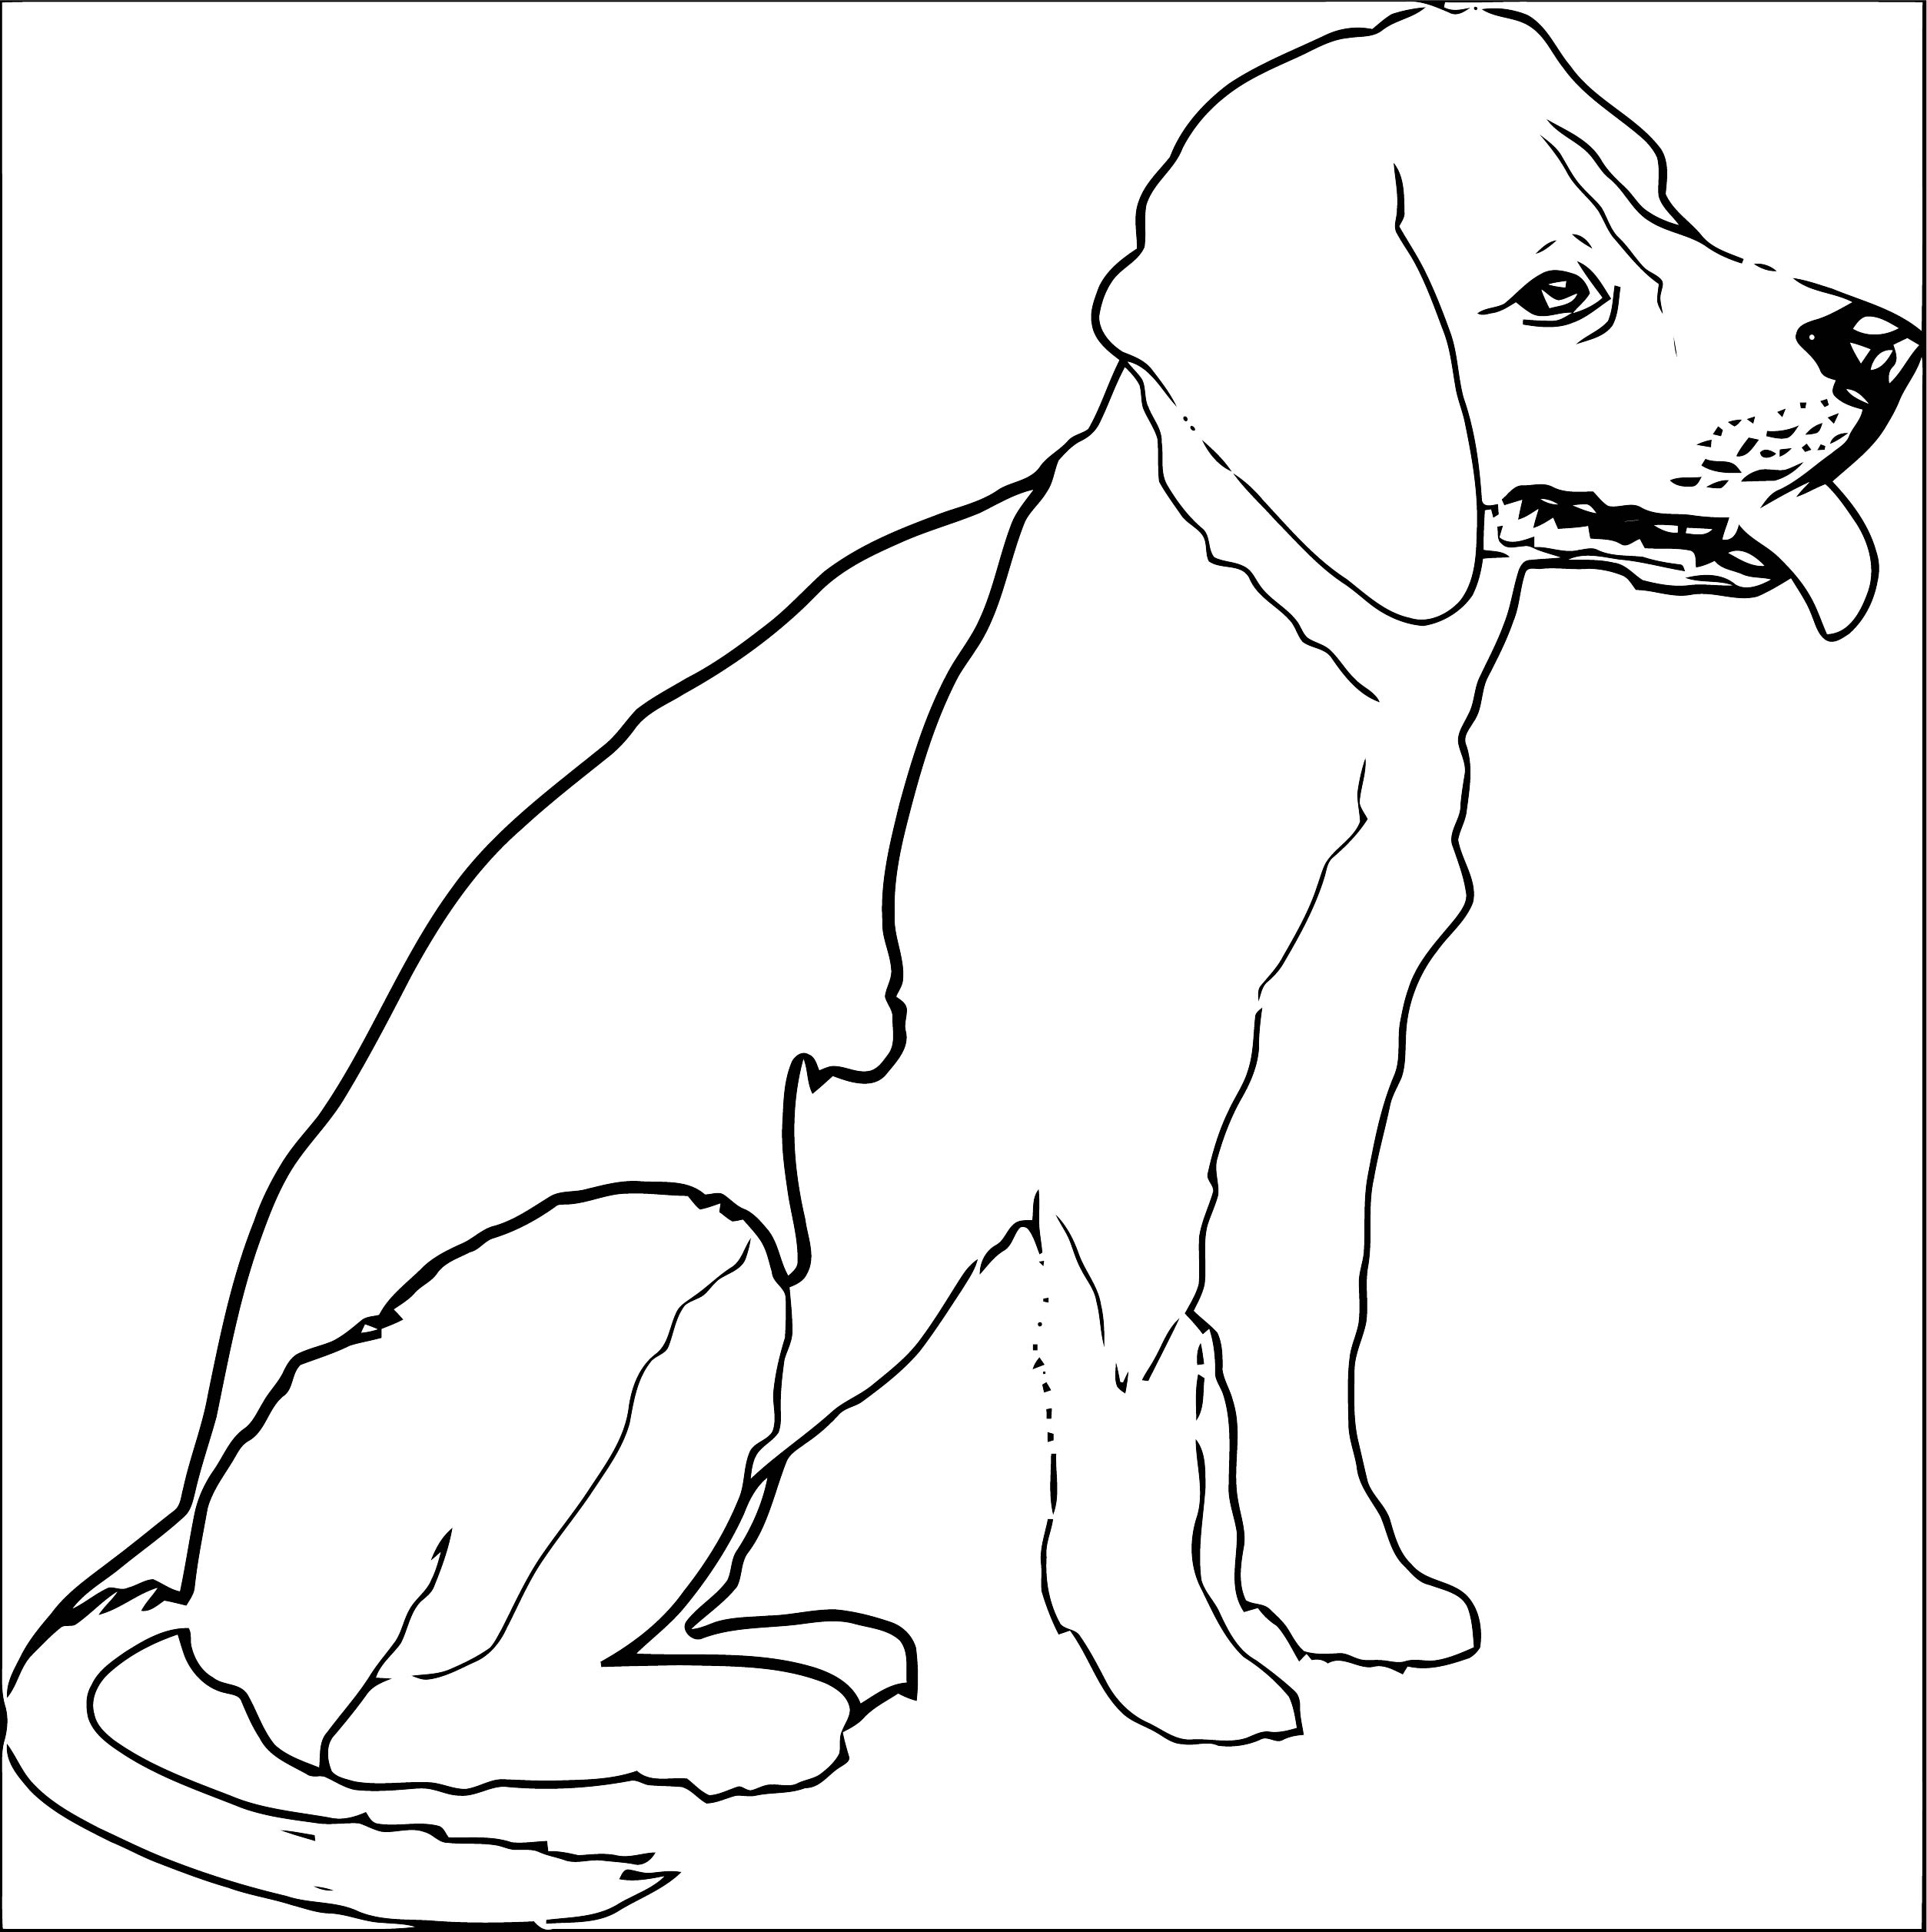 Realistic Outline Puppy Dog Coloring Page [Converted] | Wecoloringpage.com